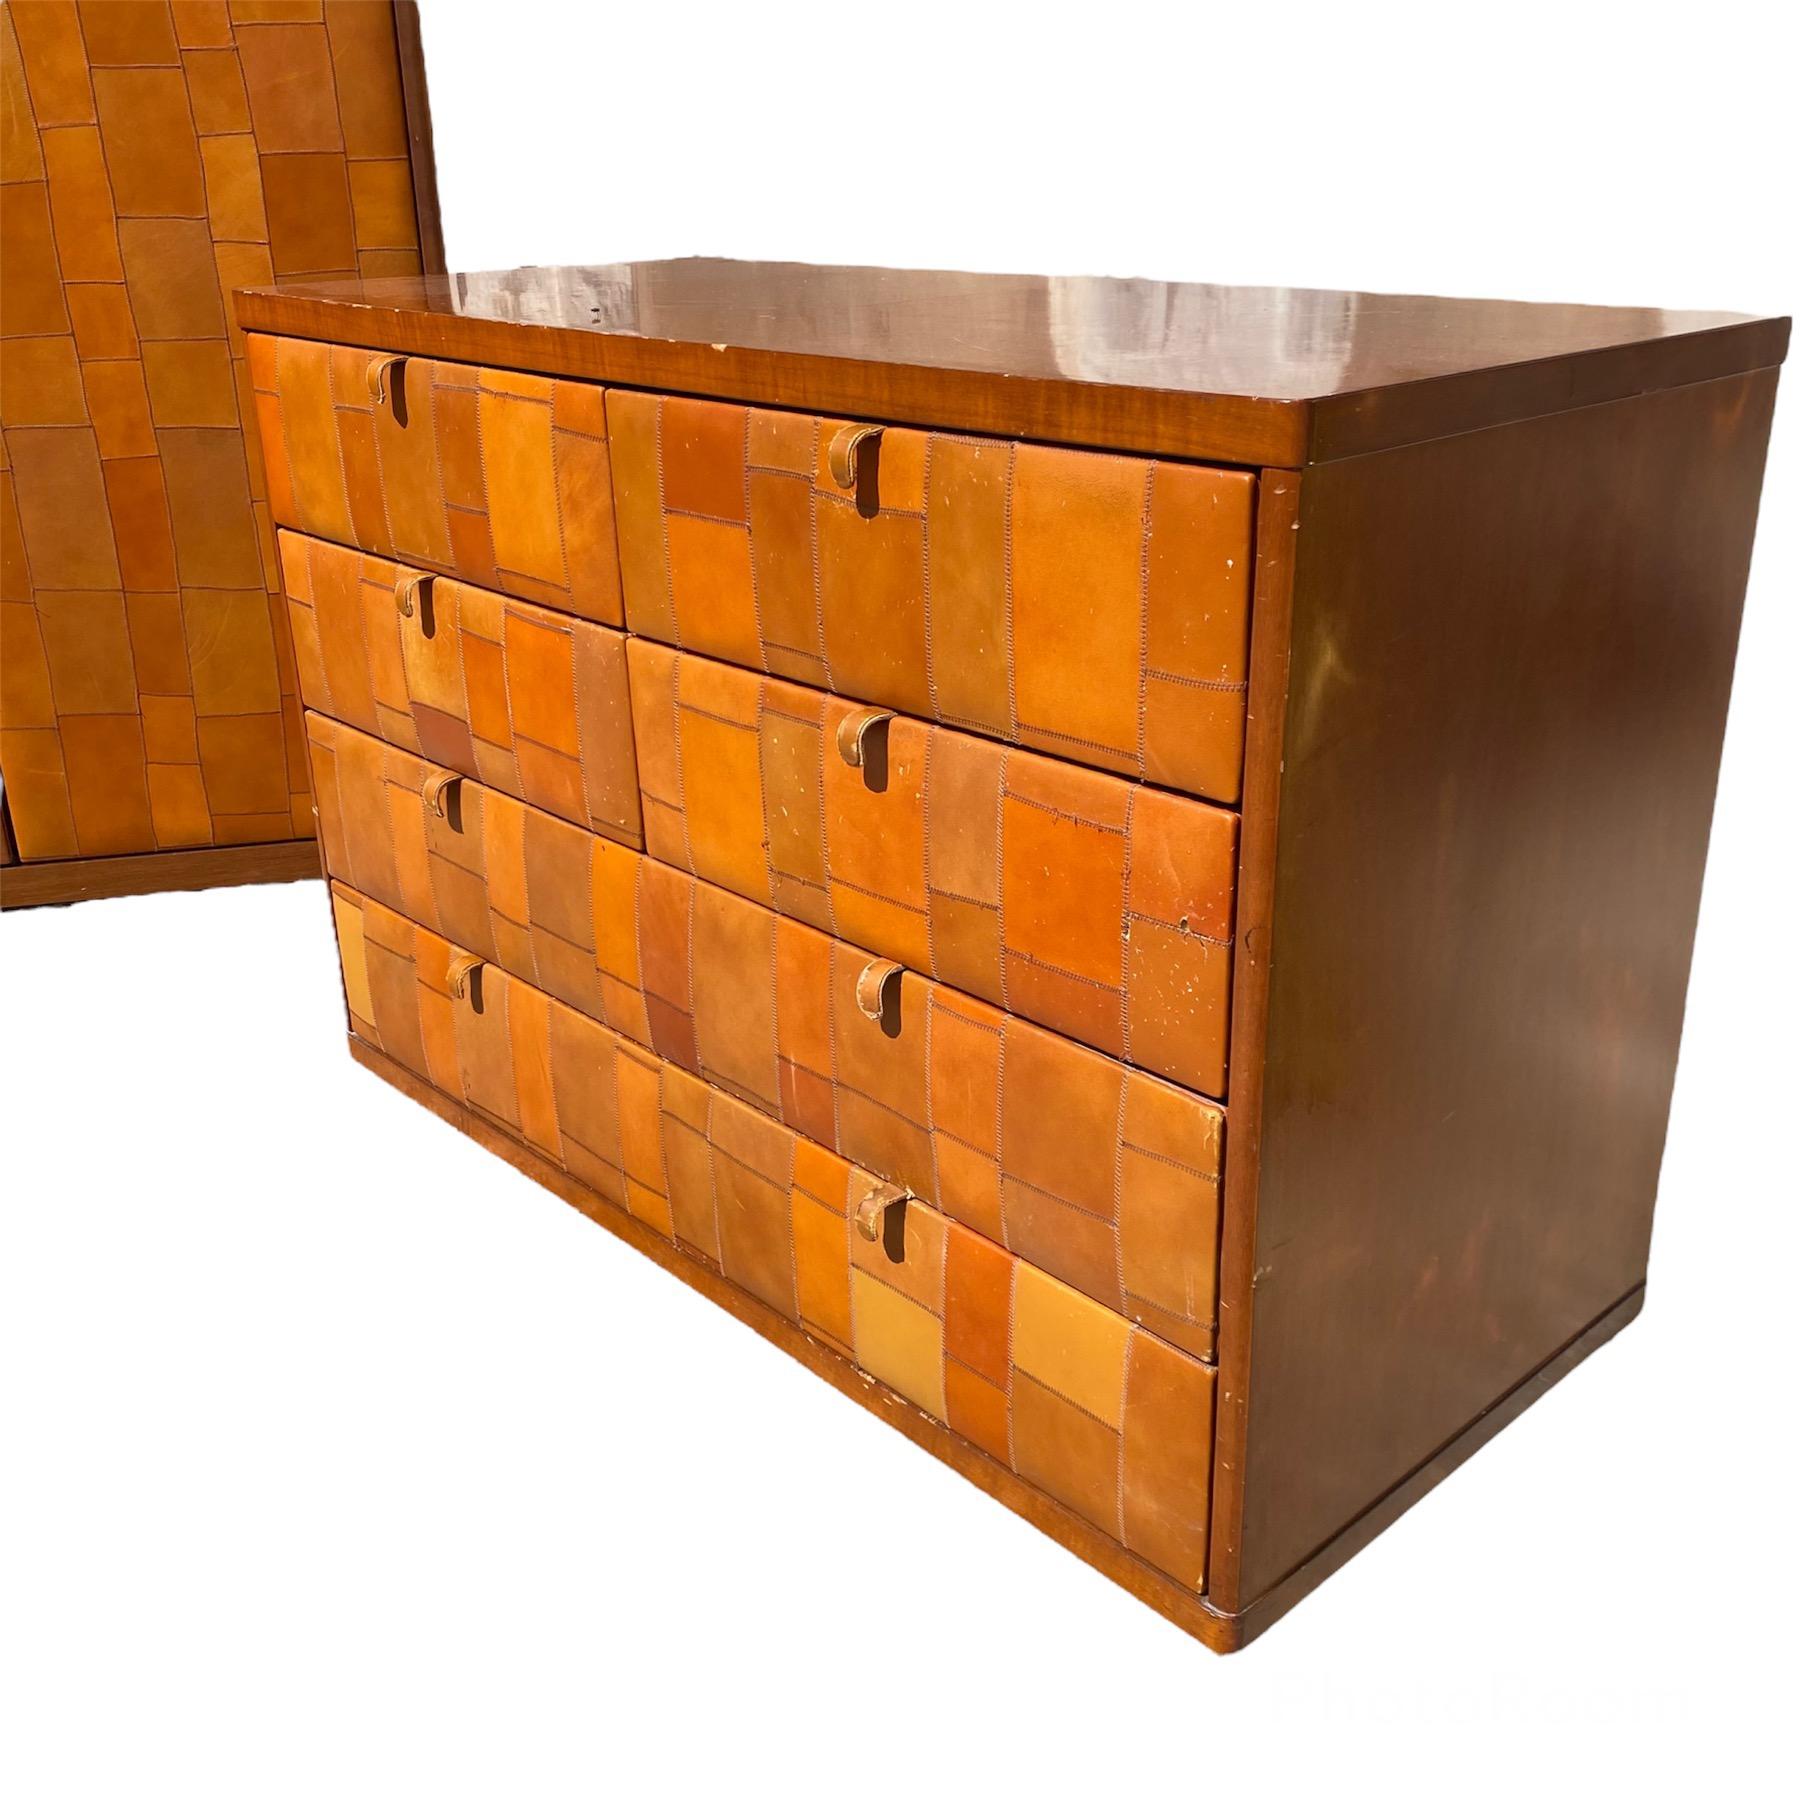 Italian Chest Of Drawers in Pecary leather by Tito Agnoli for Caleido\Poltrona Frau For Sale